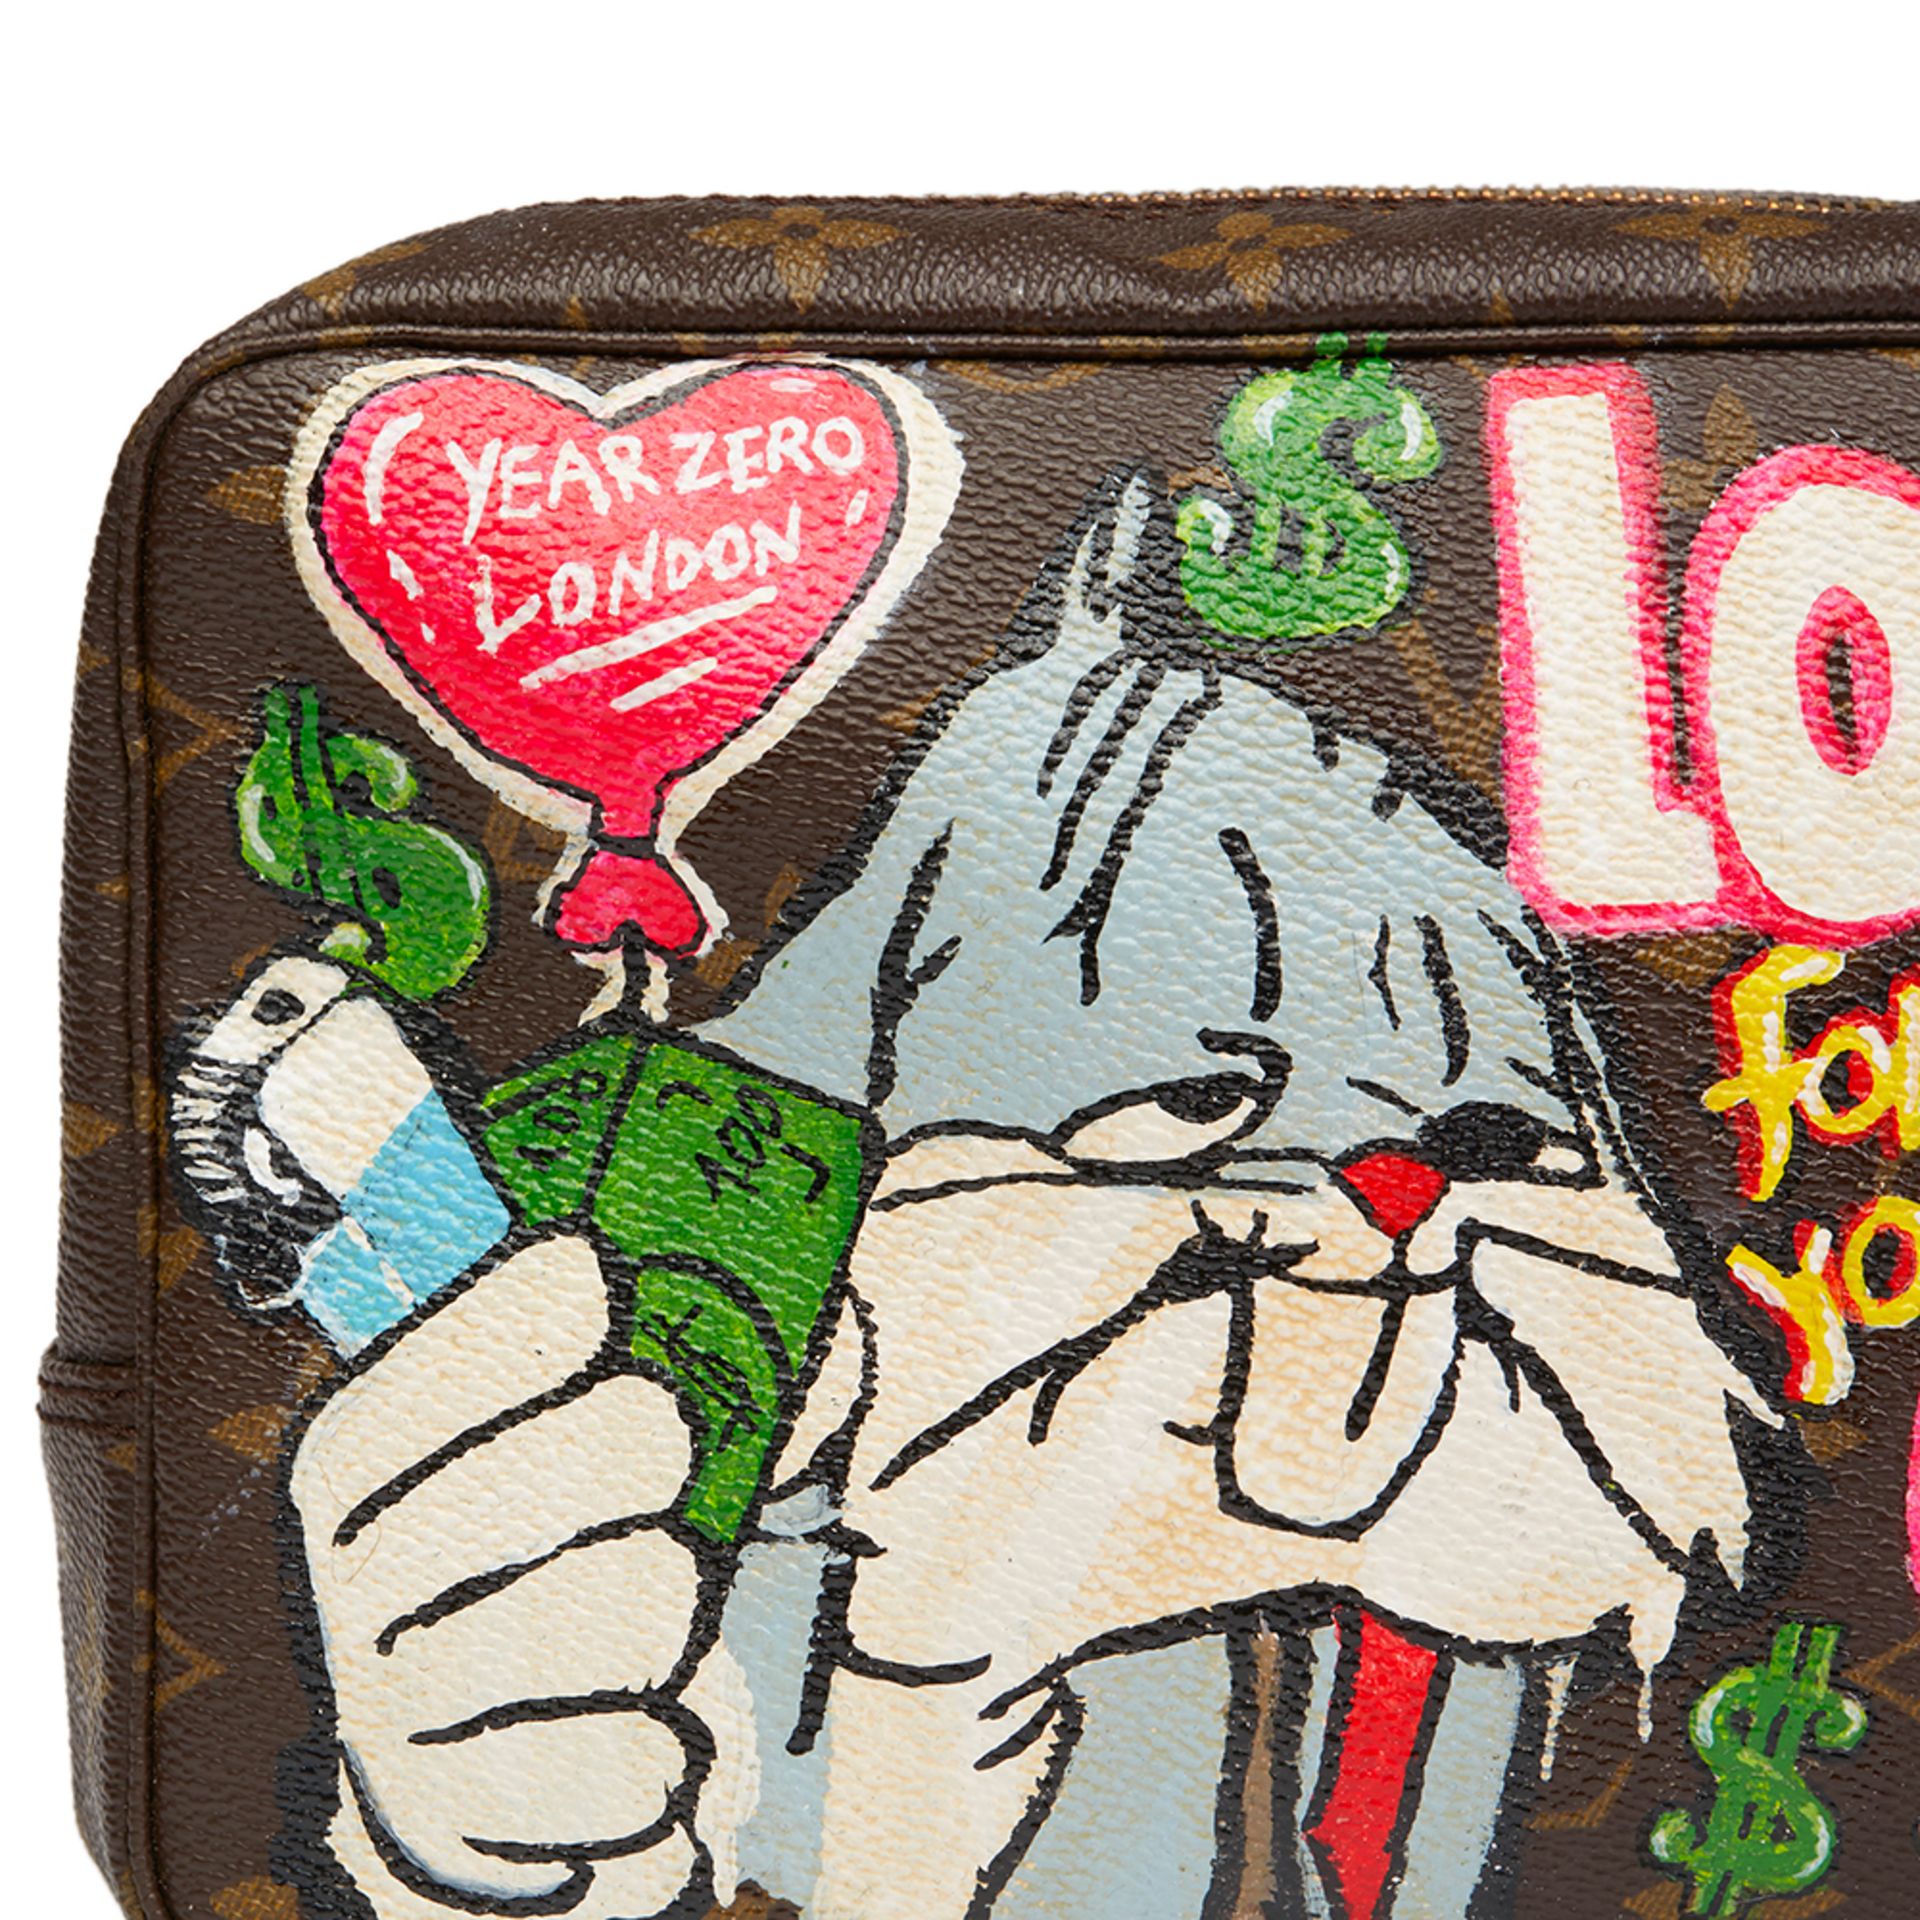 Louis Vuitton Hand-Painted 'Lonely For You Only' X Year Zero London Toiletry Pouch - Image 8 of 9